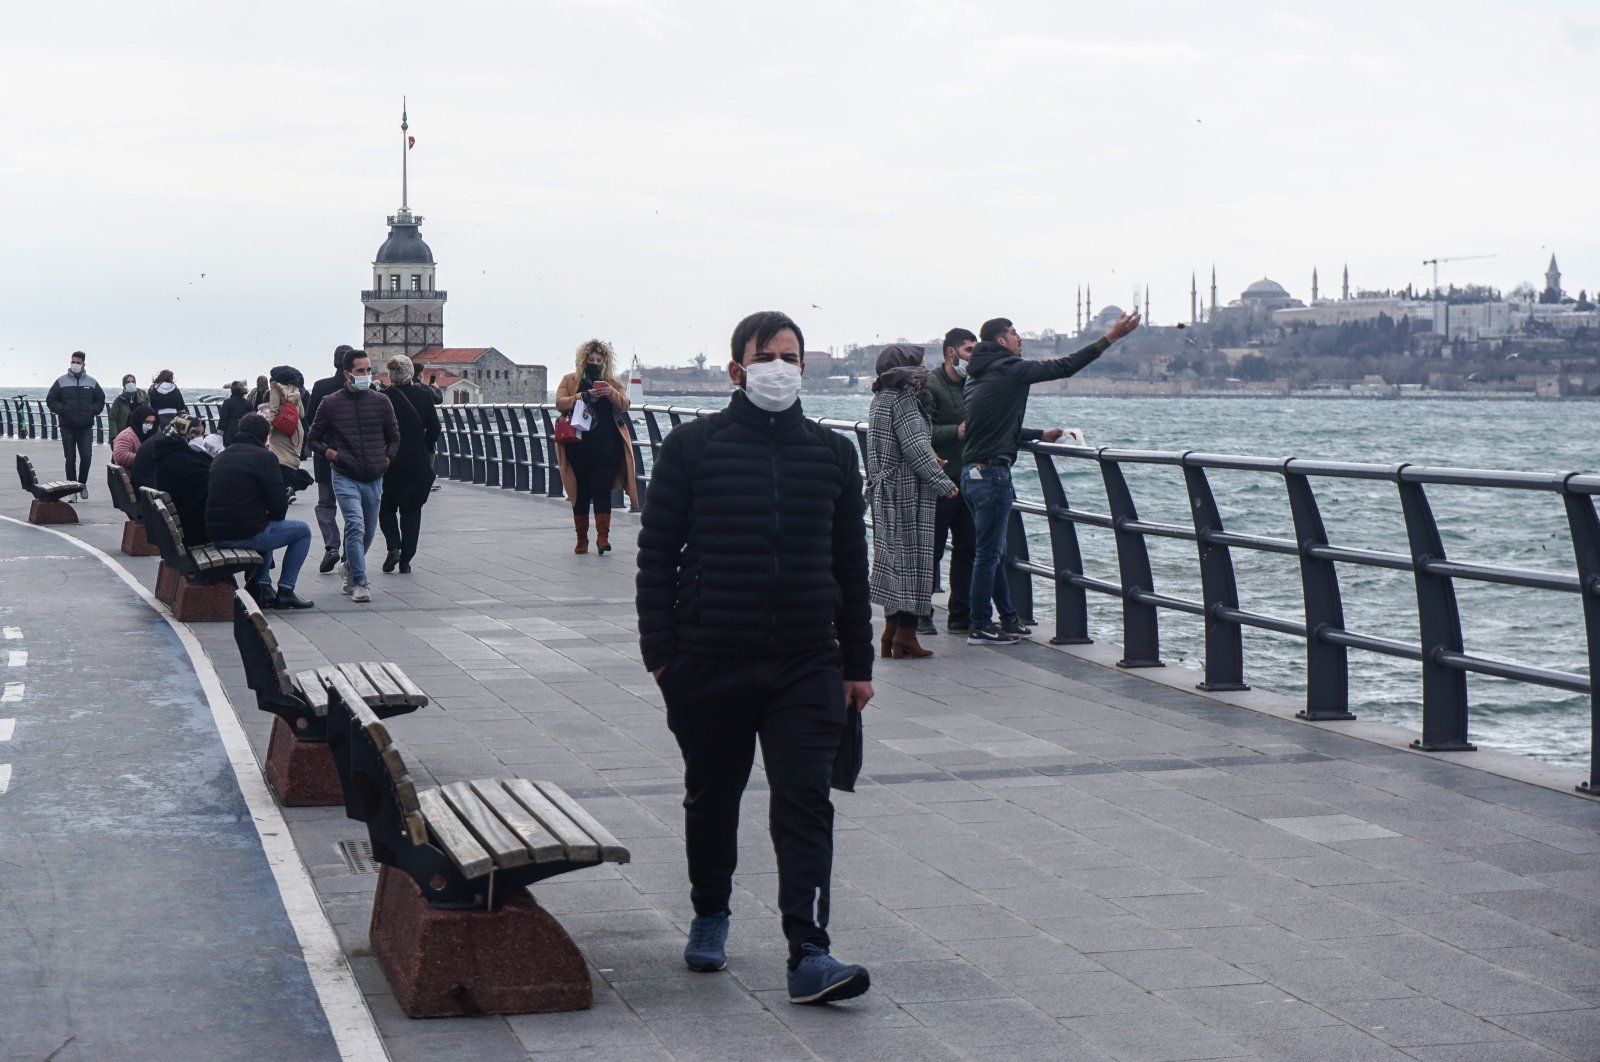 A man wearing a facemask as a precaution against the spread of COVID-19 walks by the seaside in the Üsküdar neighborhood of Istanbul, Turkey, March 16, 2021. (Reuters Photo)